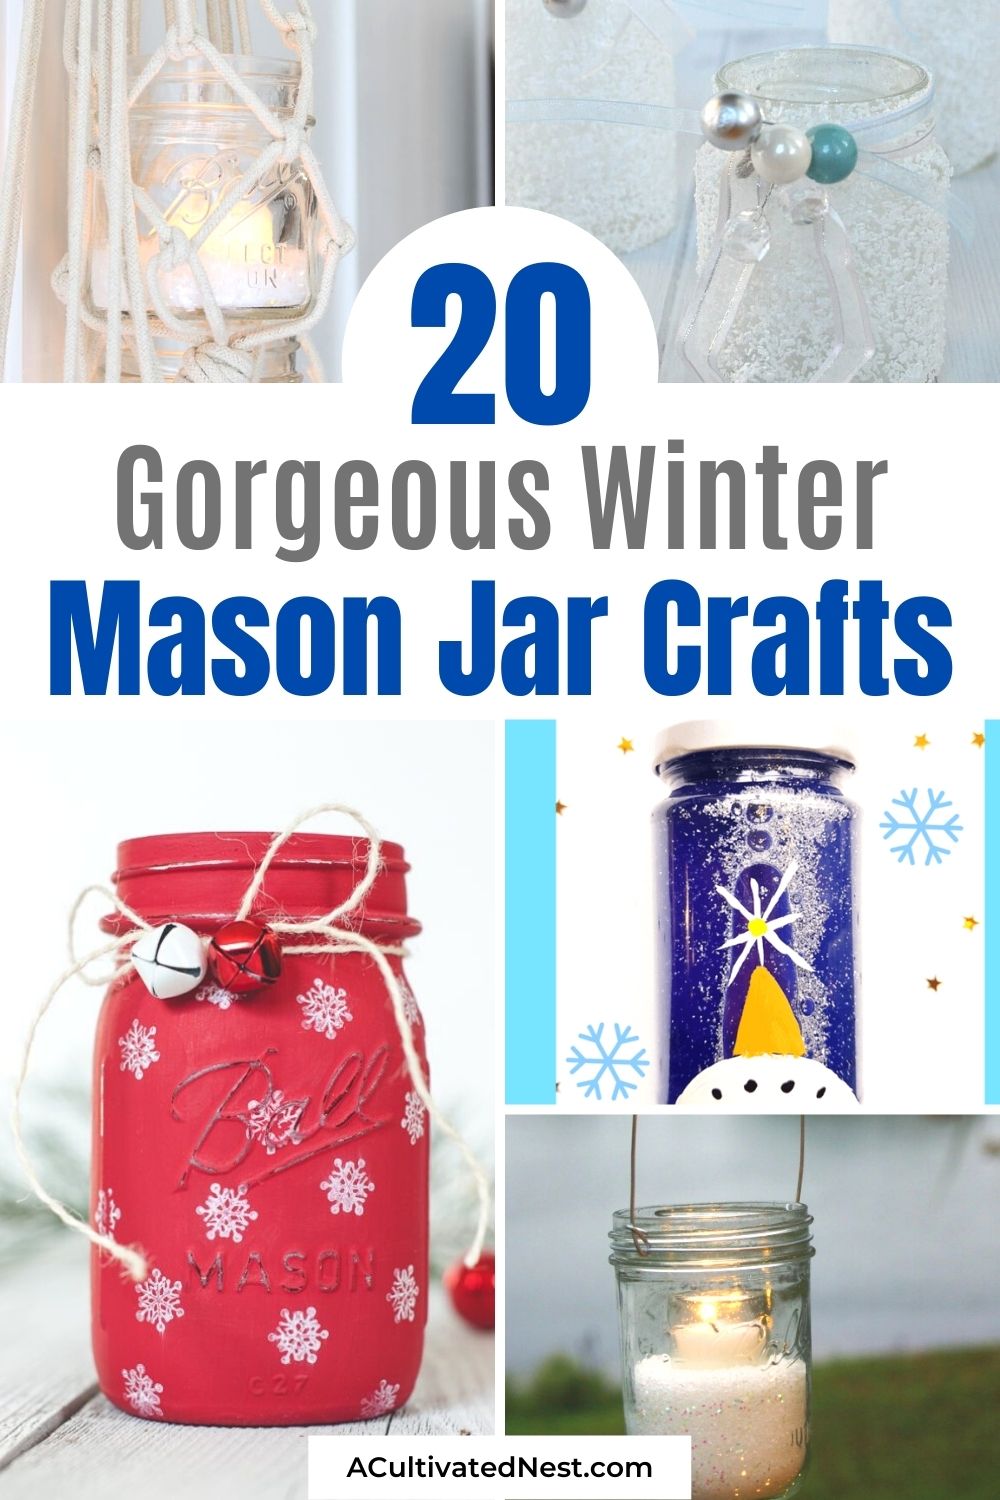 20 Gorgeous Winter Mason Jar Crafts- For an easy and inexpensive way to update your home's décor this winter, check out these gorgeous winter Mason jar crafts! | Christmas Mason jar crafts, #masonJarCrafts #winterDIY #winterDecor #winterCrafts #ACultivatedNest